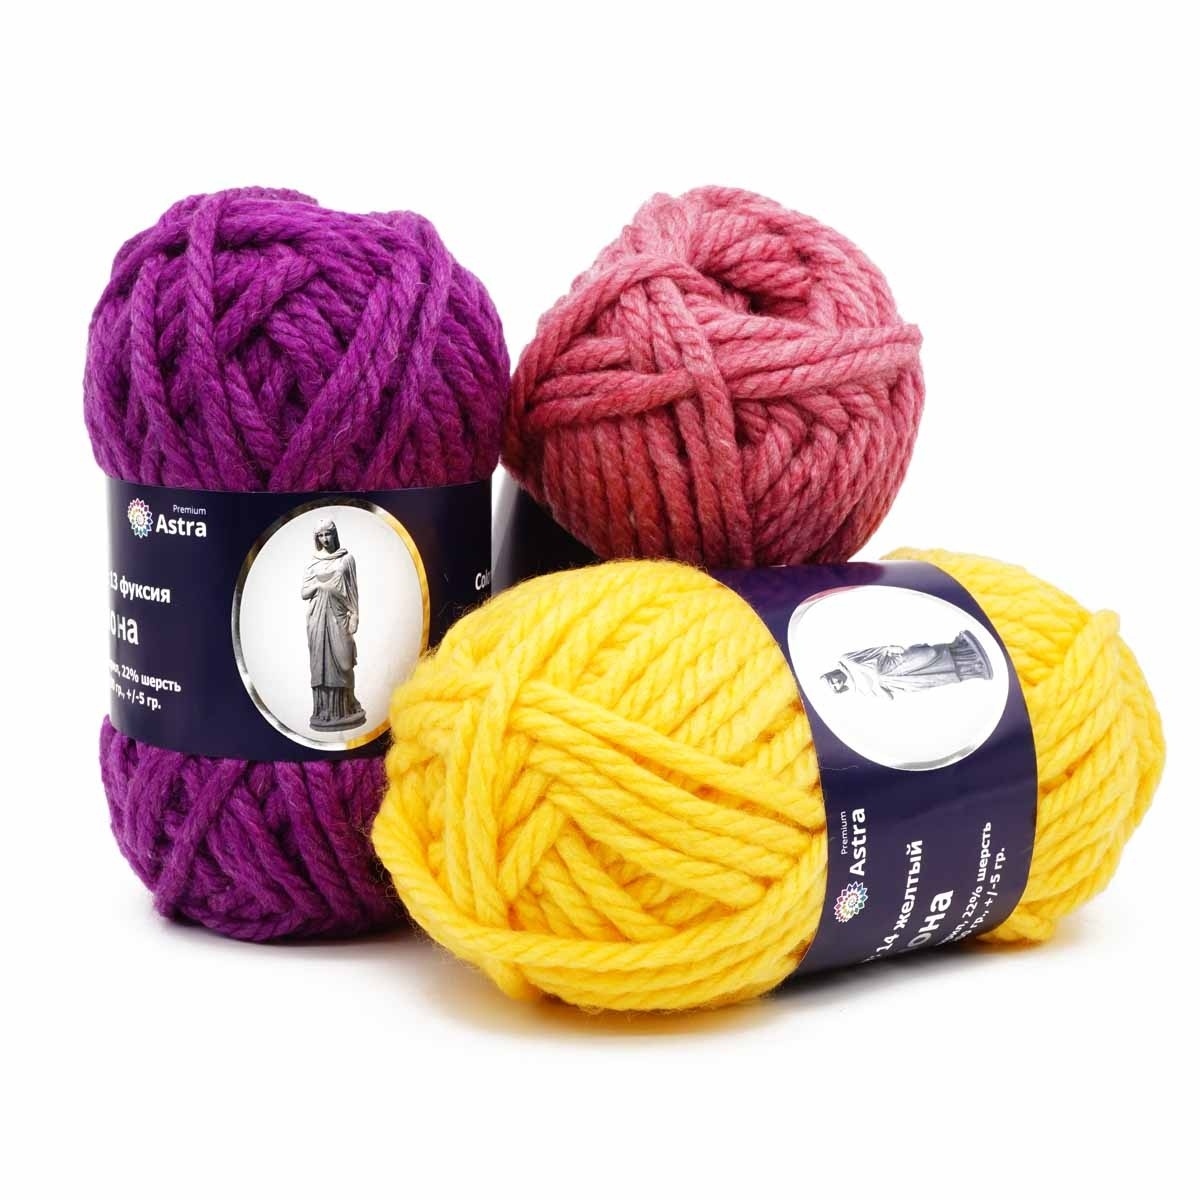 Astra Premium Dione, 22% Wool, 78% Acrylic, 5 Skein Value Pack, 1000g фото 1